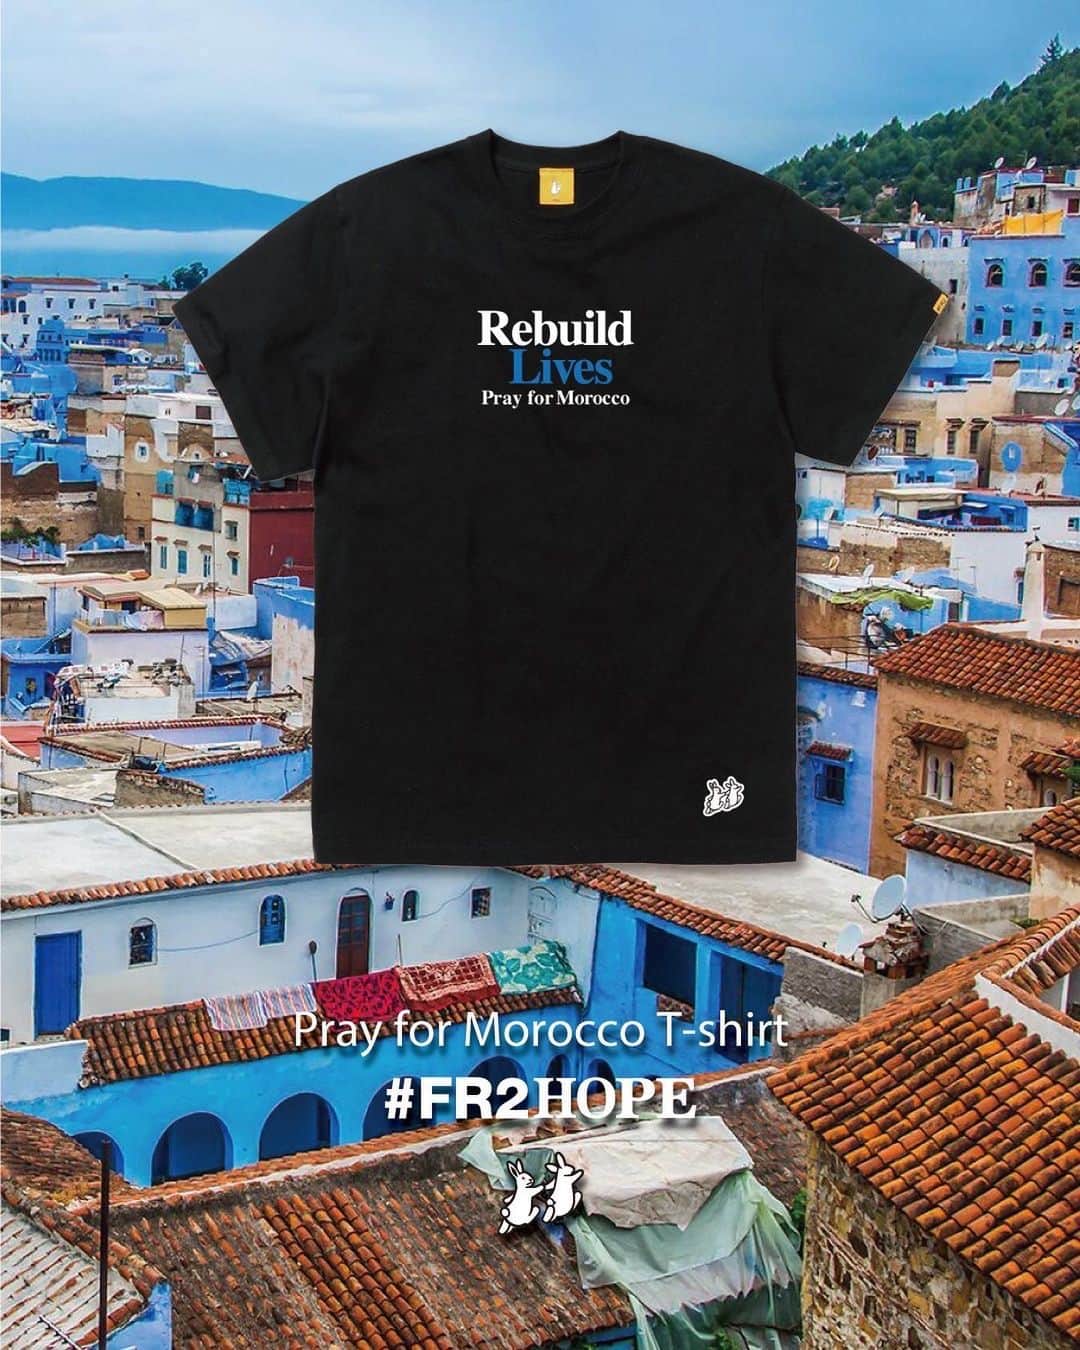 #FR2さんのインスタグラム写真 - (#FR2Instagram)「#FR2Hope As a project, we will provide support for the disaster that occurred in Morocco on September 9th. Starting today, we will start accepting orders at the #FR2 Online Store. All proceeds from product sales, minus the costs involved in producing this project, will be donated to the Japanese Red Cross Society.  Order period: September 12th (Tuesday) to September 18th (Monday), 2023  #FR2希望 プロジェクトとして、9月9日にモロッコで発生した災害への支援を行います。 本日から #FR2 Online Storeで受注販売を開始いたします。 こちらの企画の制作にかかわるコストを引いた商品の売上の全ては、日本赤十字社に寄付します。  受注期間：2023年9月12日（火）～18日（月）  #FR2Hope 作为一个项目，我们将为 9 月 9 日摩洛哥发生的灾难提供支持。 从今天开始，我们将开始在 #FR2 在线商店接受订单。 产品销售的所有收益，减去制作该项目所涉及的成本，将捐赠给日本红十字会。  订购时间：2023年9月12日（星期二）至9月18日（星期一）  #FR2Hope 作為一個項目，我們將為 9 月 9 日摩洛哥發生的災難提供支持。 從今天開始，我們將開始在 #FR2 在線商店接受訂單。 產品銷售的所有收益，減去製作該項目所涉及的成本，將捐贈給日本紅十字會。  訂購時間：2023年9月12日（星期二）至9月18日（星期一）  #FR2希望　#FR2HOPE」9月12日 19時41分 - fxxkingrabbits